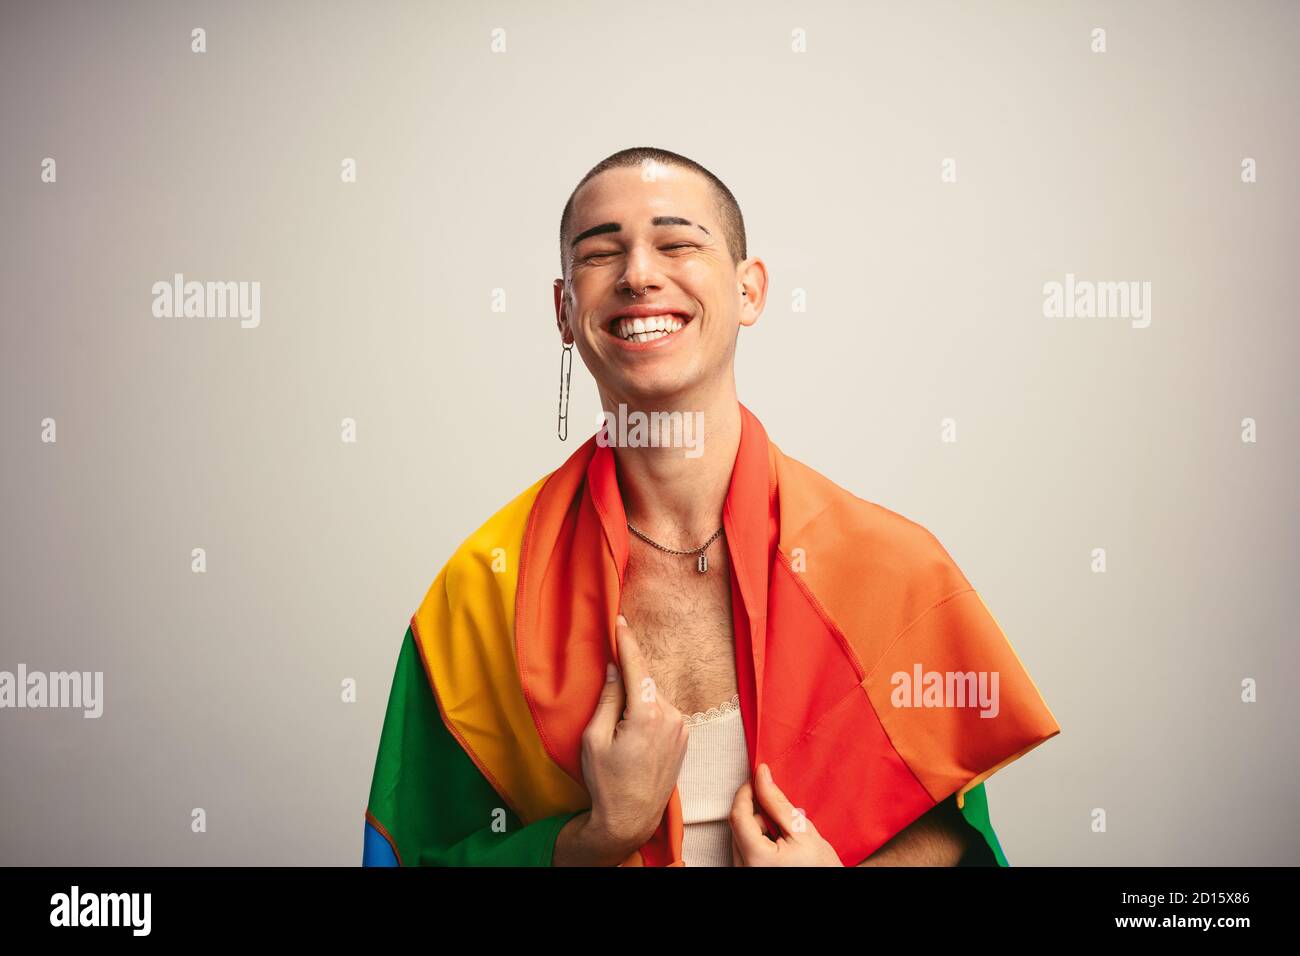 Cheerful transgender man with gay pride flag. Gender fluid male with lgbt flag against white background. Stock Photo